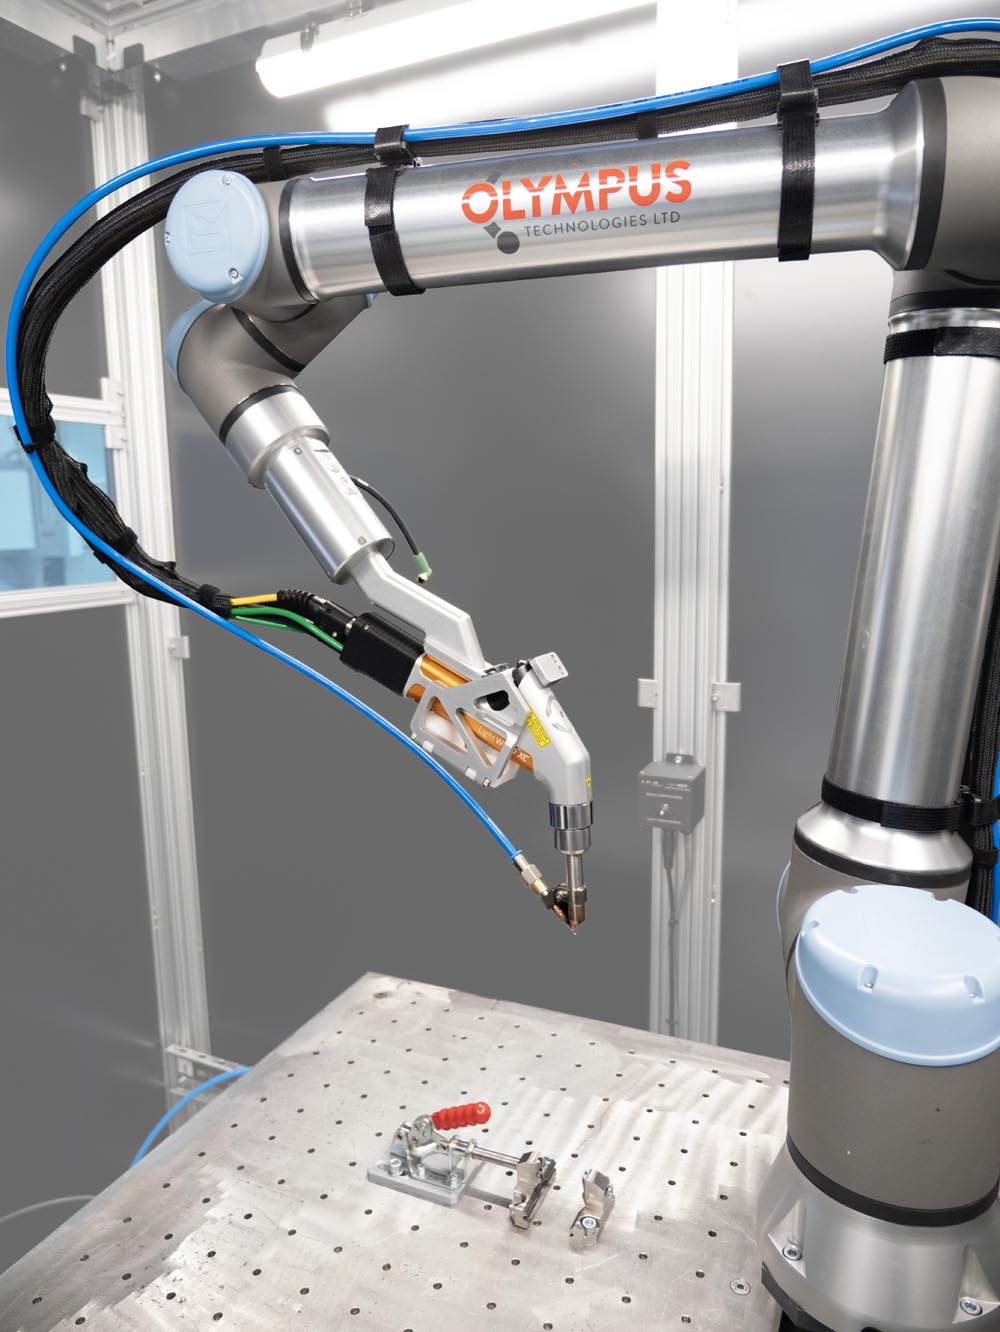 Olympus Technologies has launched the UK’s first Universal Robot cobot laser welding solution. Based on our proven MIG and TIG cobot software, the solution offers faster high-quality robot welding than MIG or TIG is able to offer.